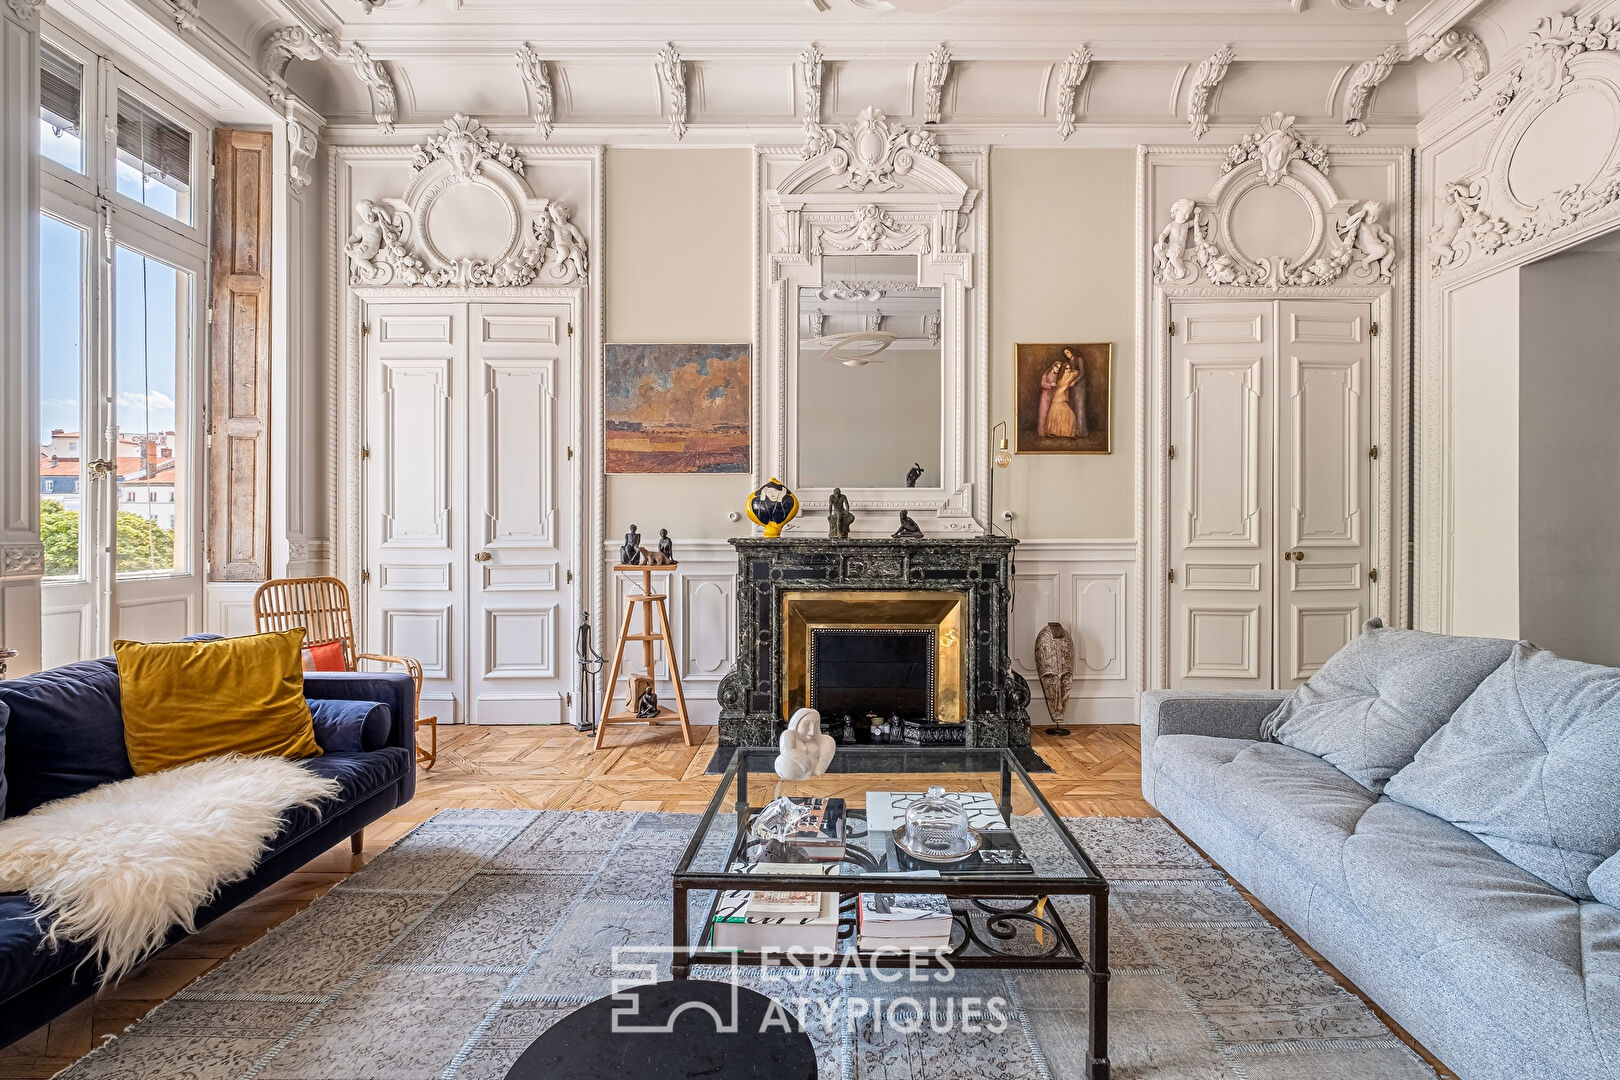 Magnificent bourgeois apartment overlooking Place Bellecour